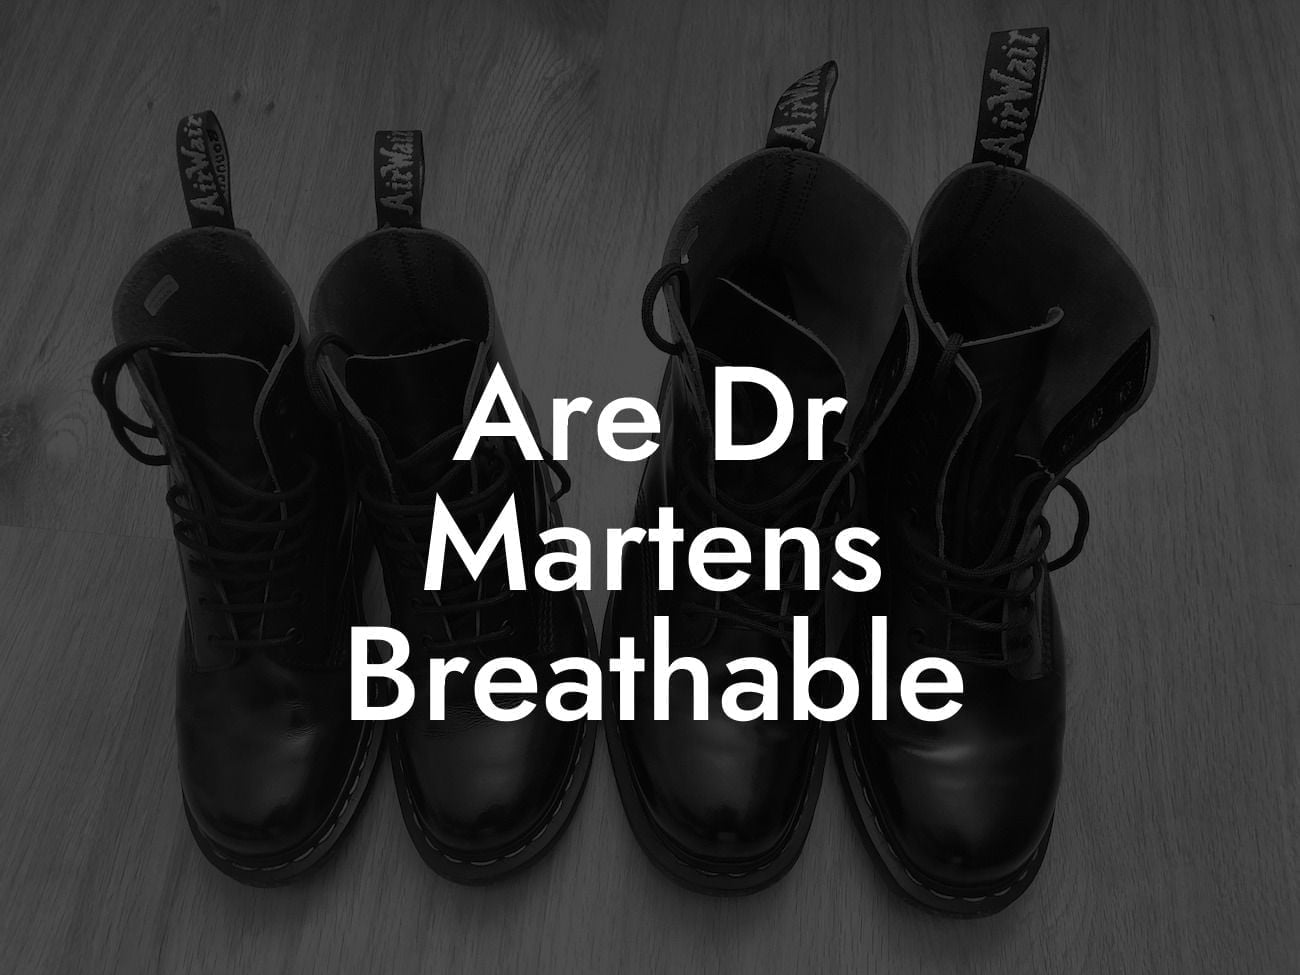 Are Dr Martens Breathable